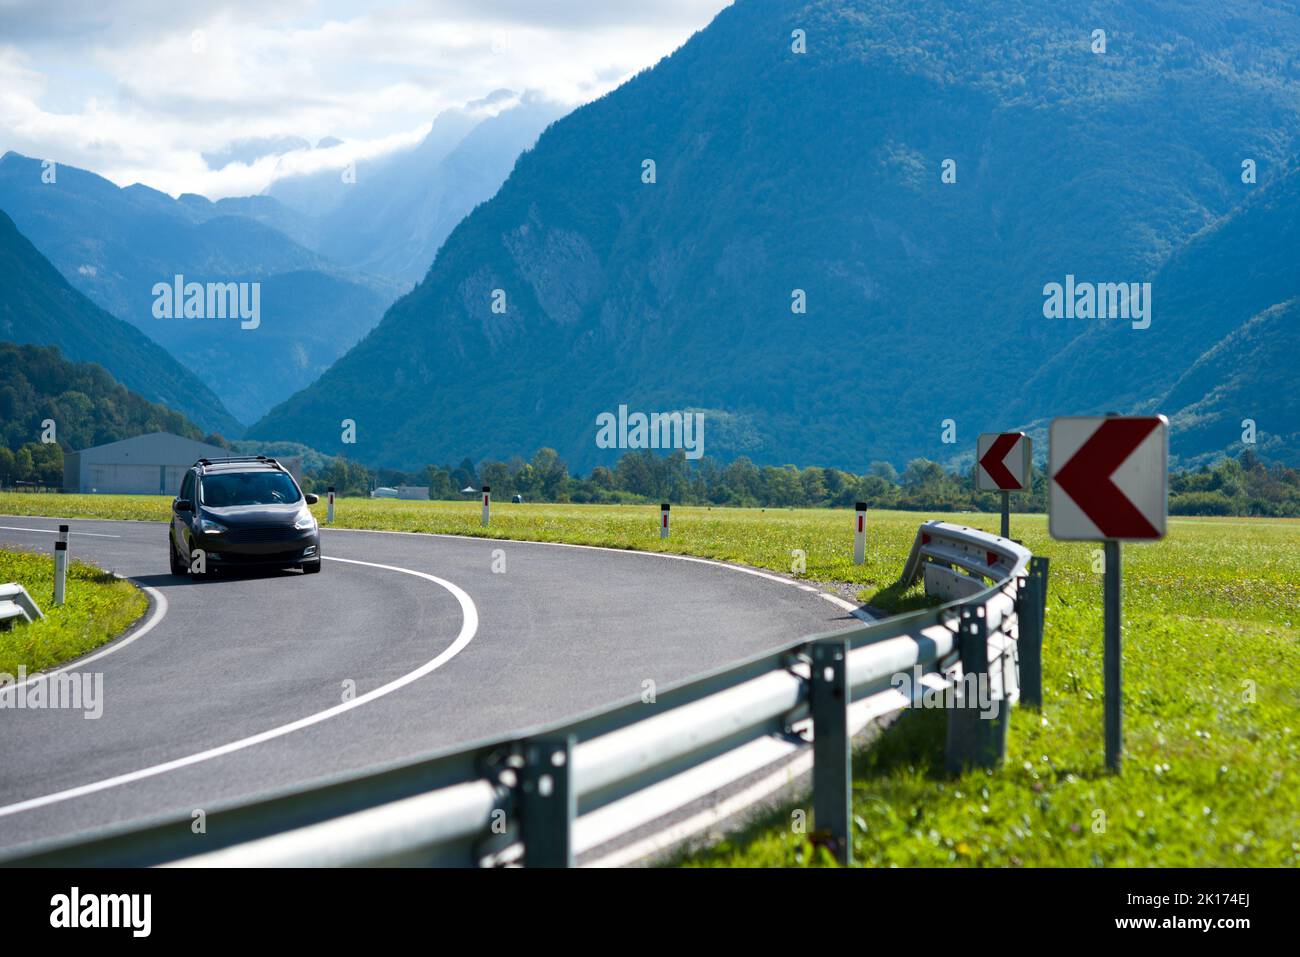 Mountain road curve with a car Stock Photo